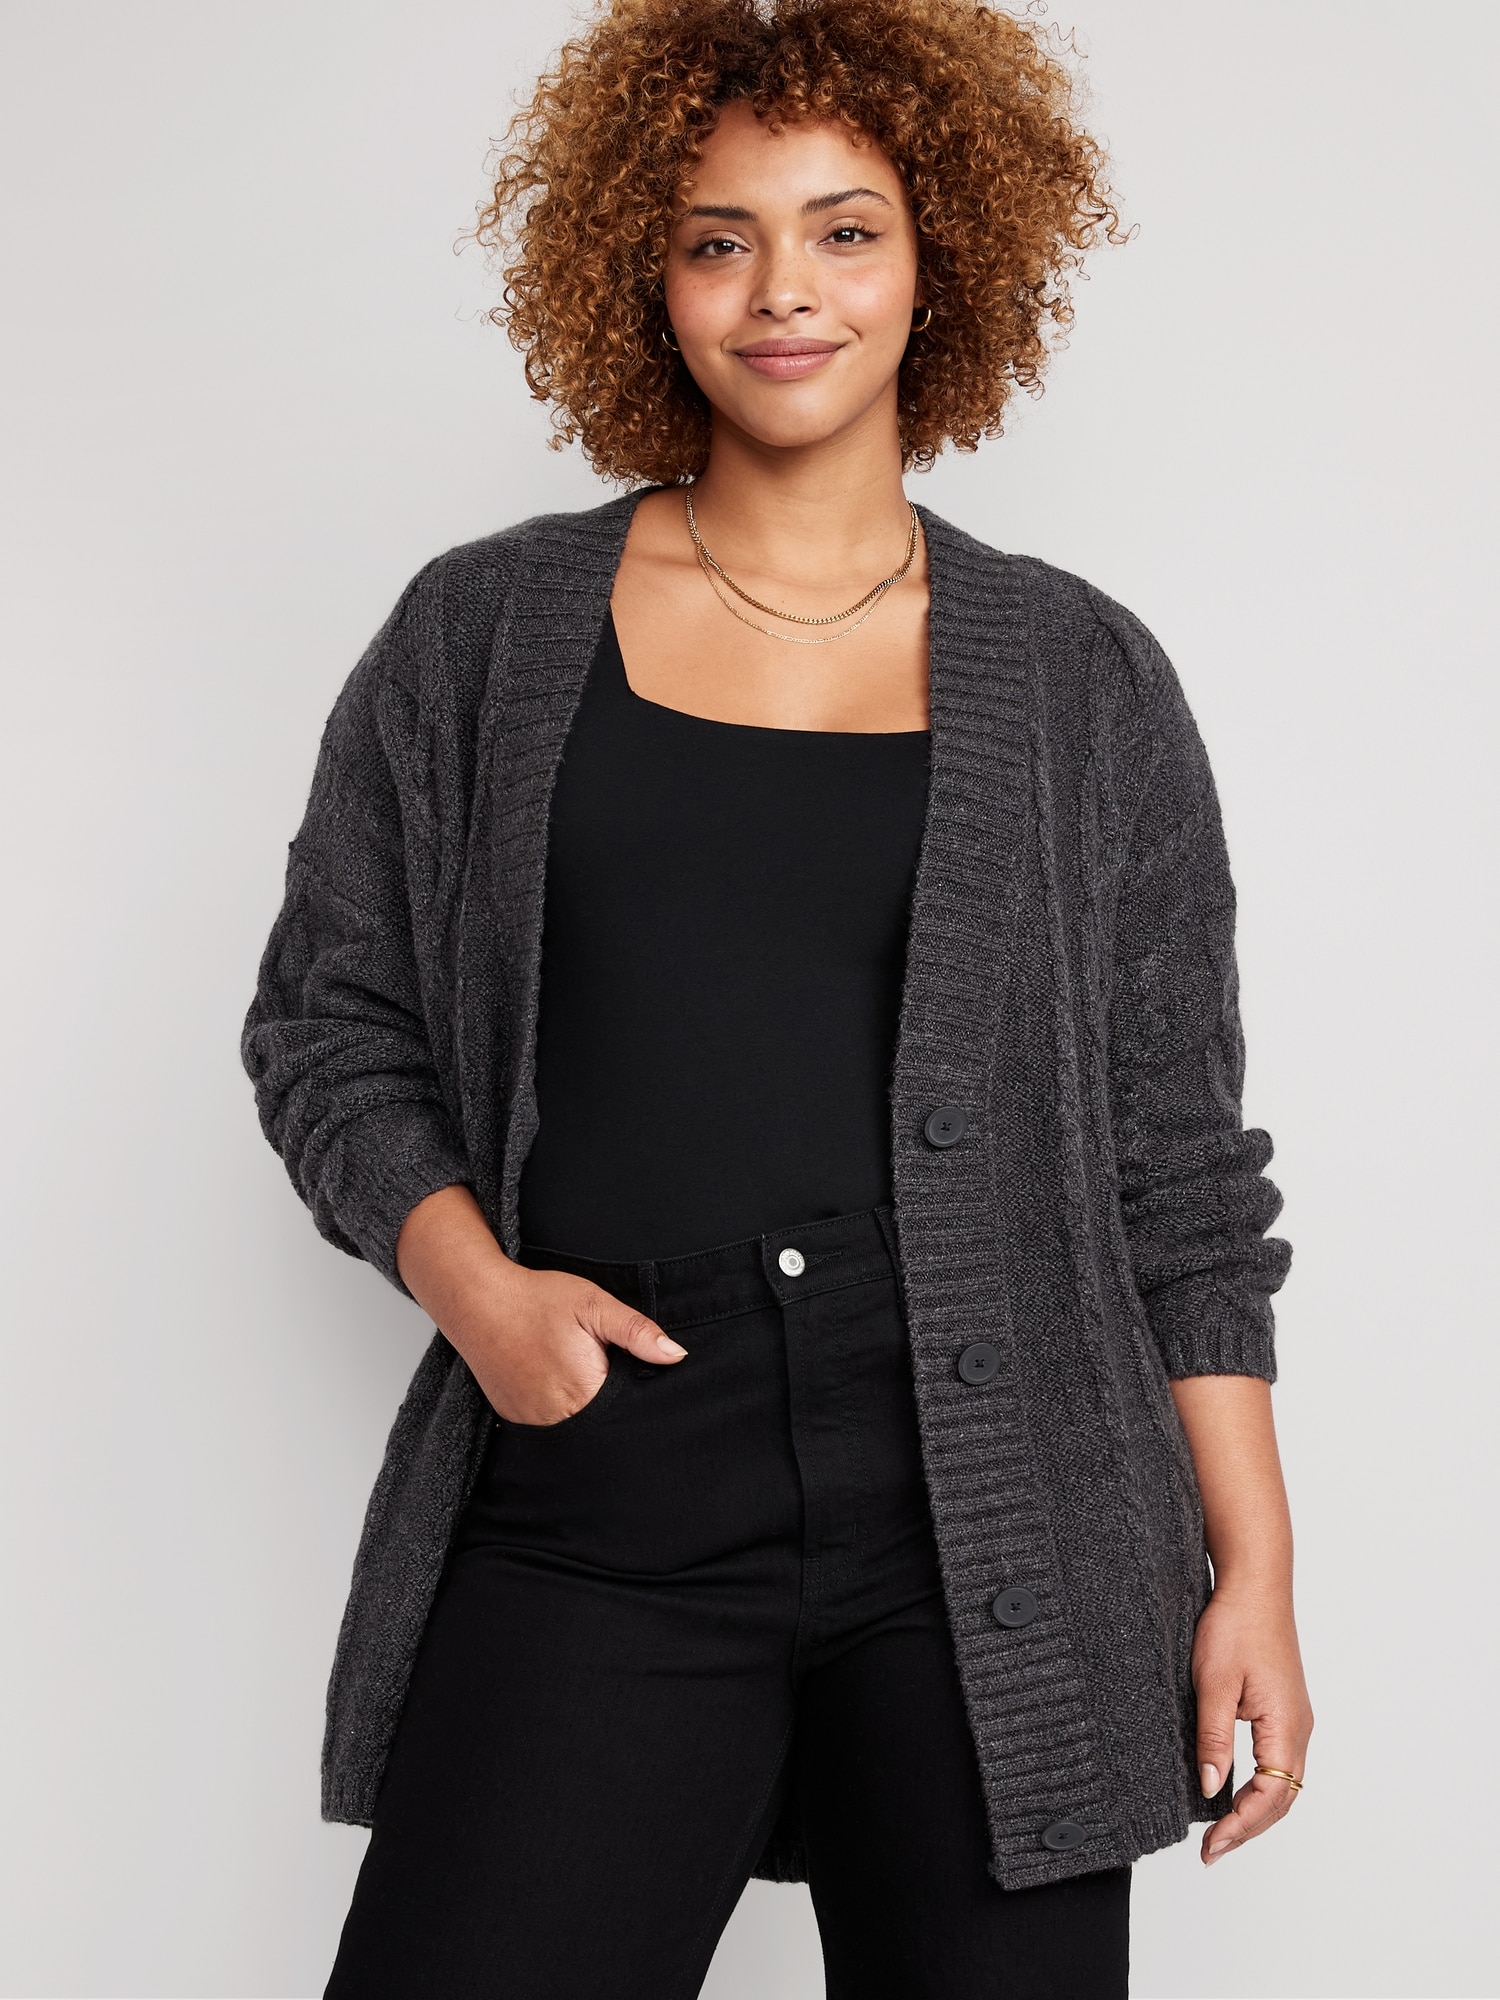 Old | Cardigan Chunky for Sweater Women Navy Cable-Knit Oversized